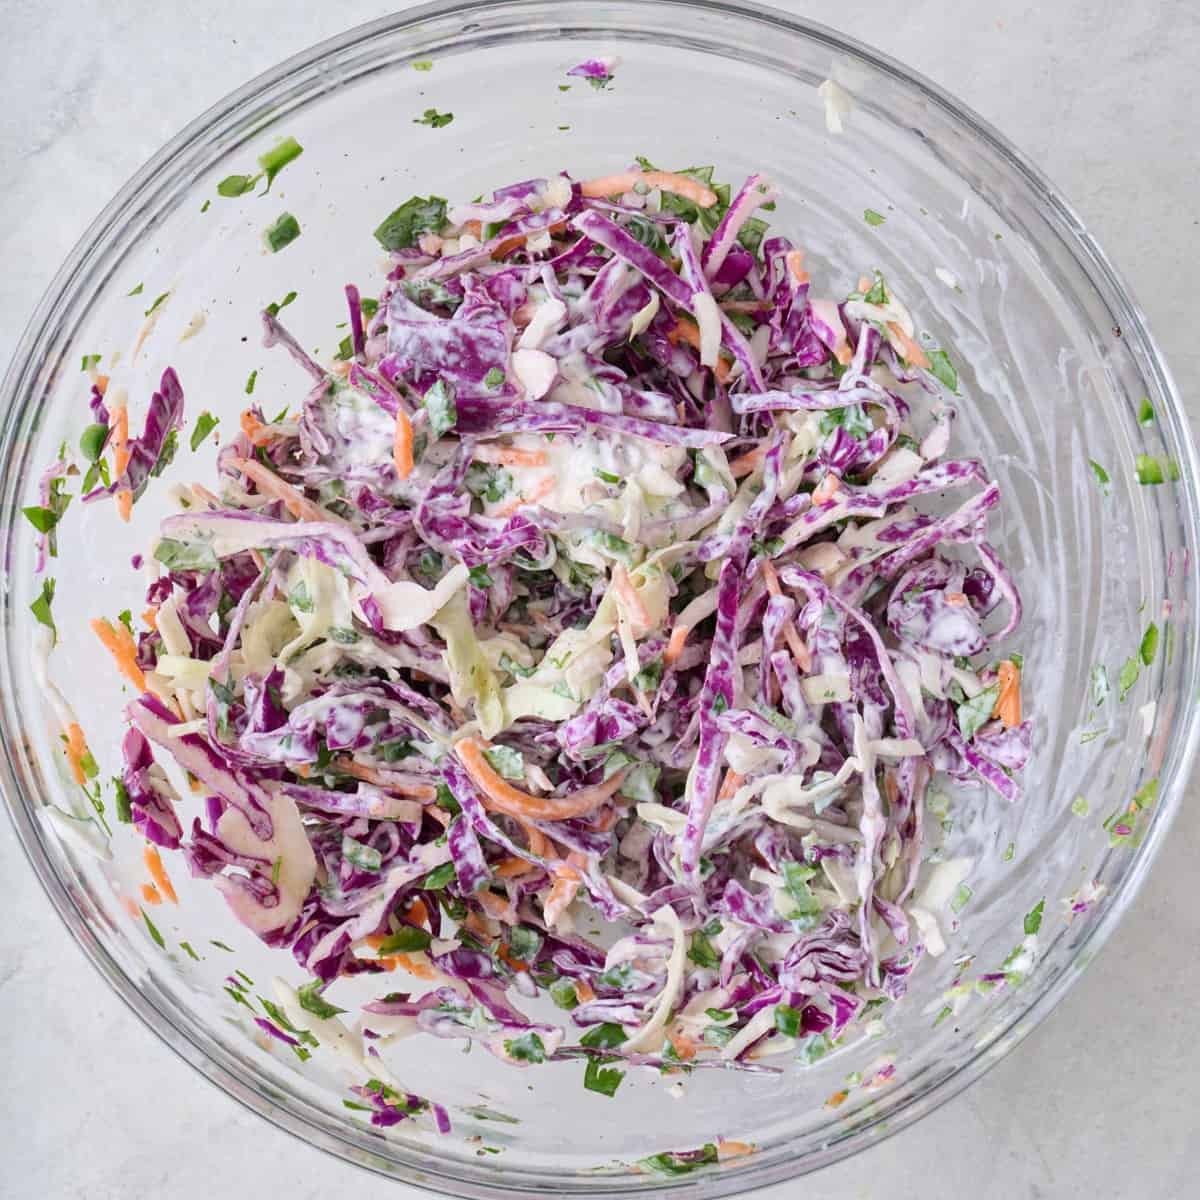 Slaw after mixing.